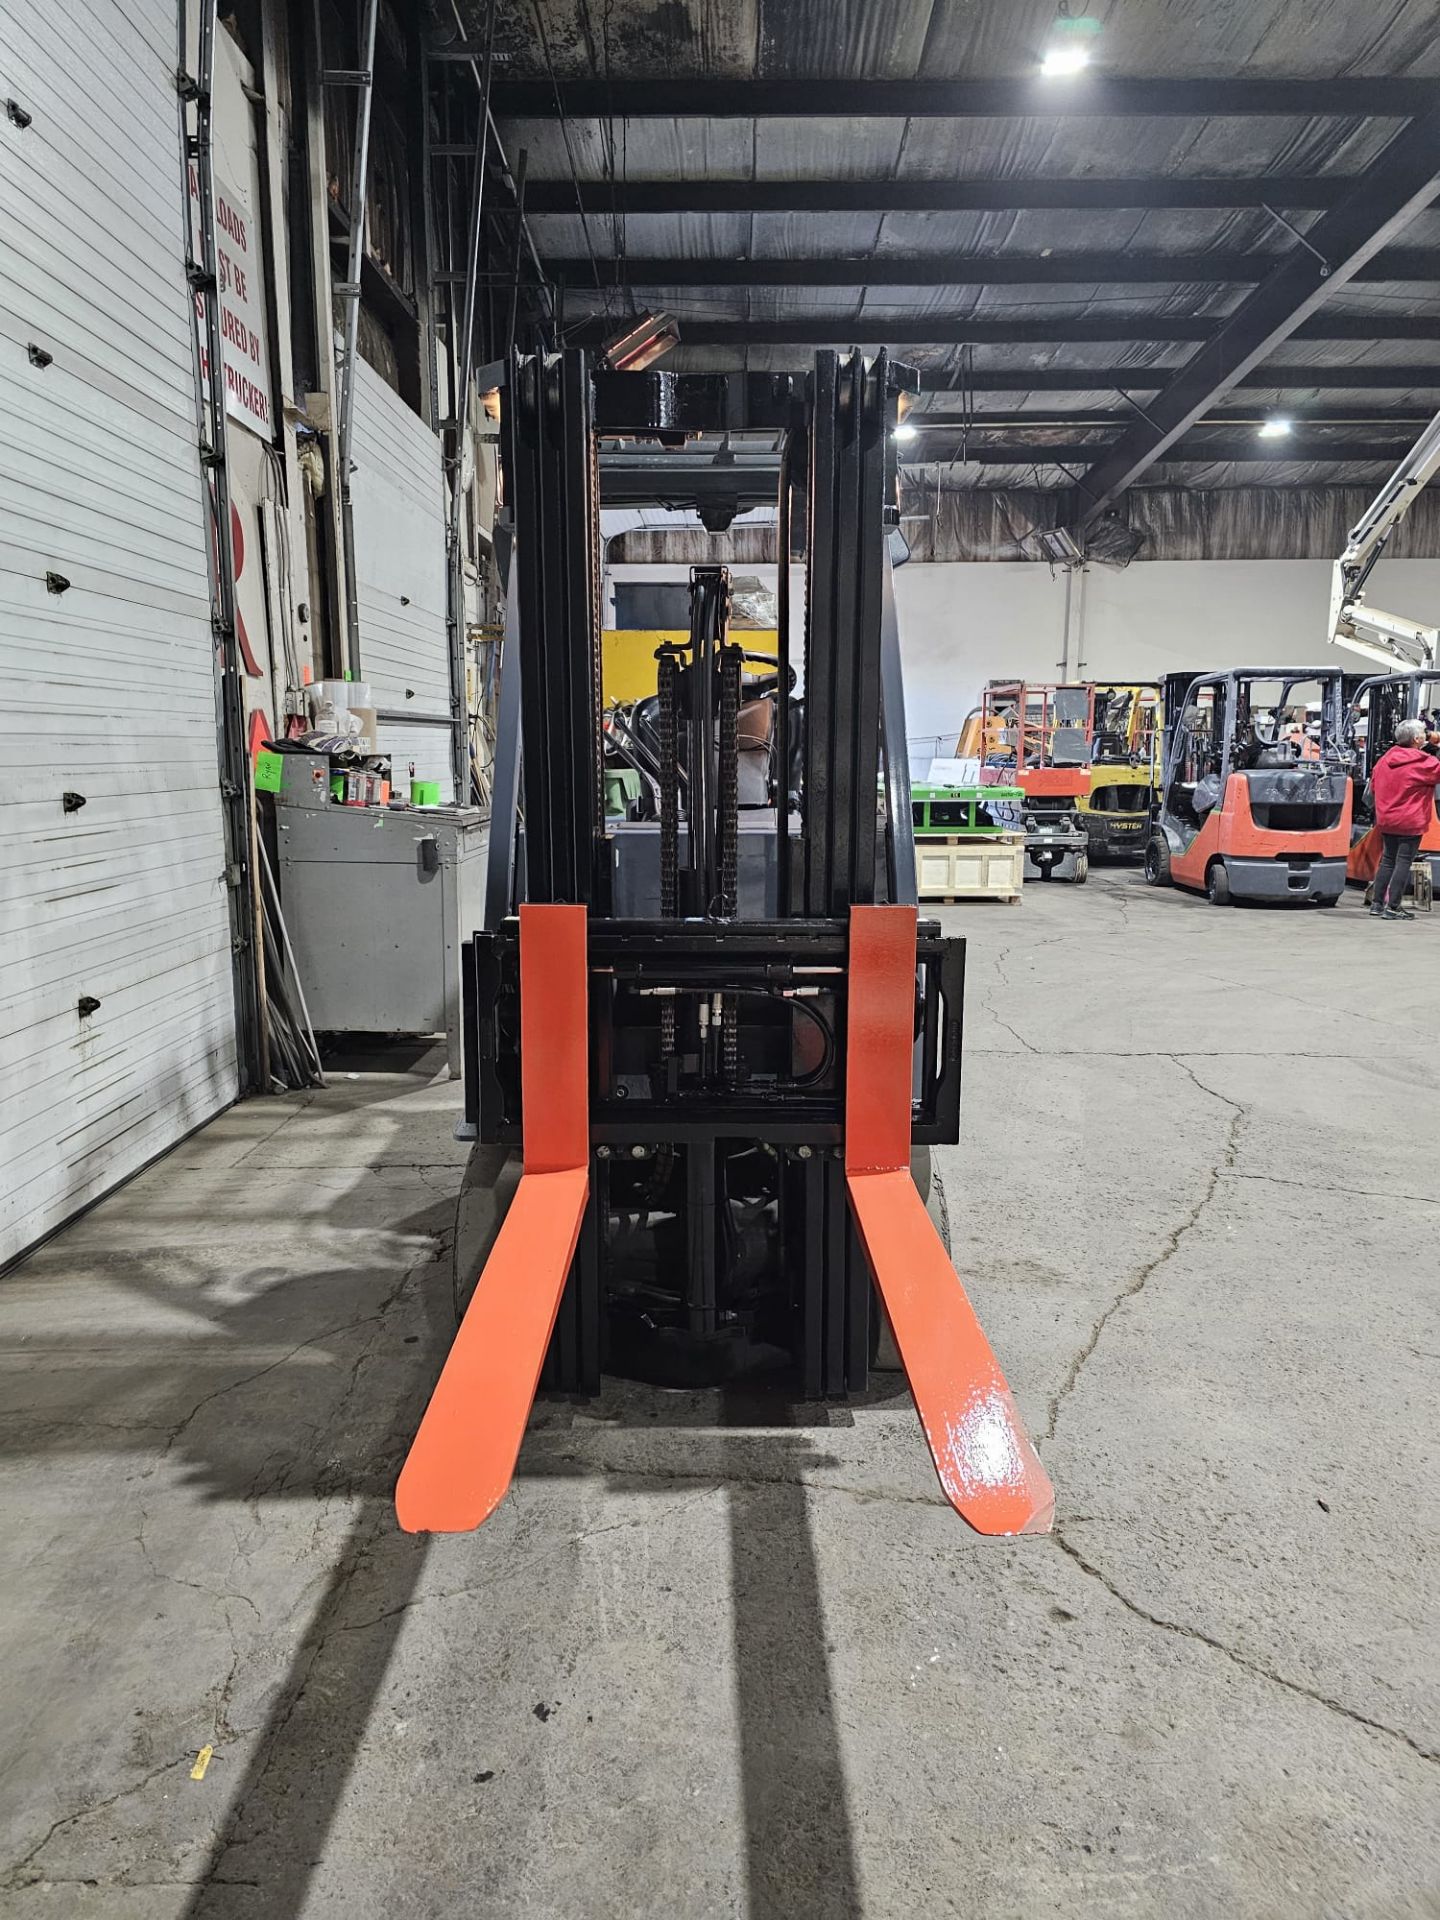 2012 TOYOTA 5,000lbs Capacity Forklift Electric 48V with sideshift with 3-STAGE MAST - FREE CUSTOMS - Image 5 of 6